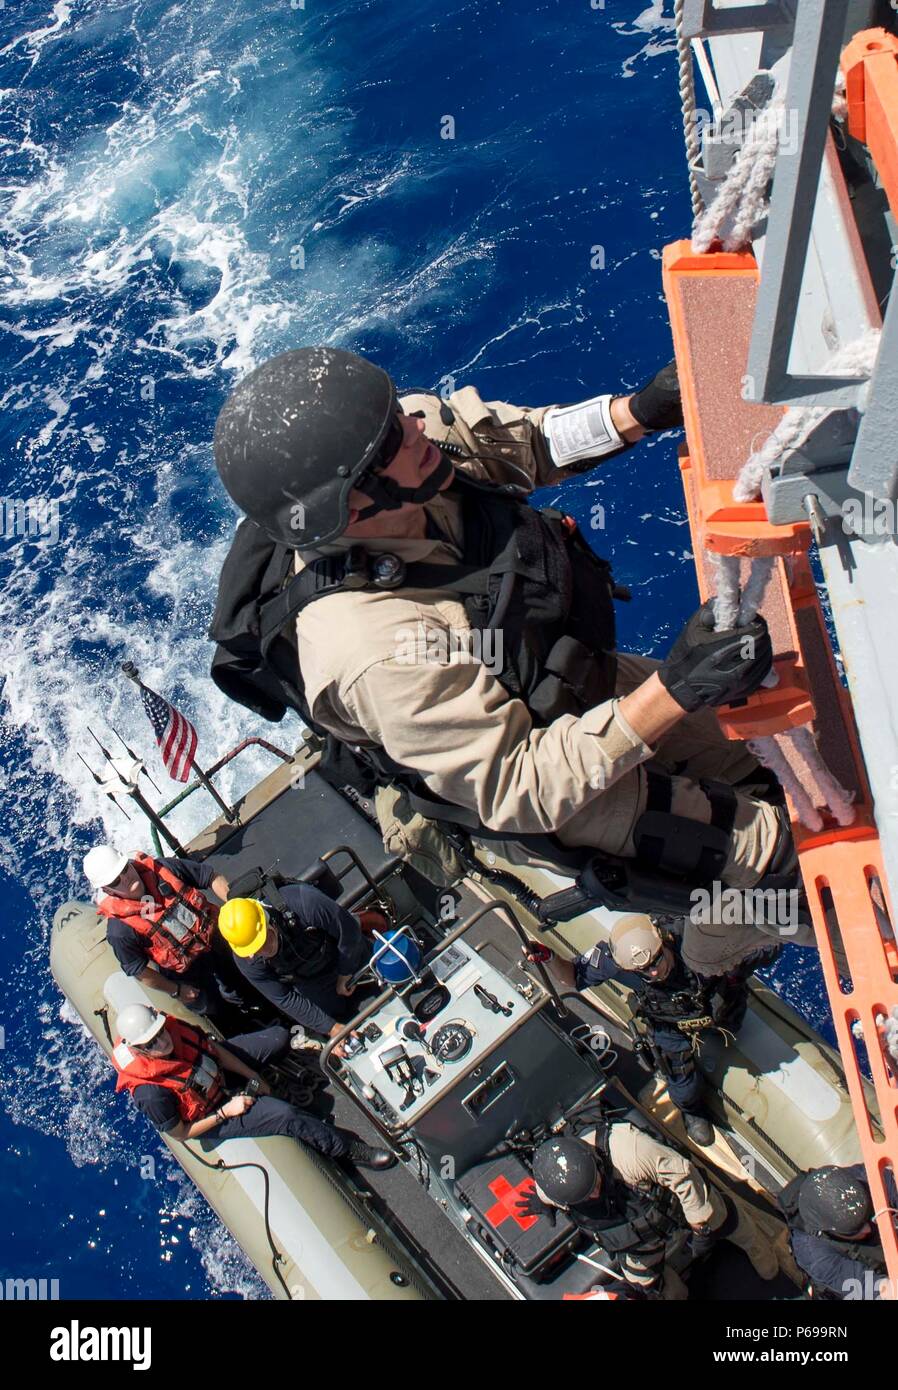 1605024-N-SU278-127  PACIFIC OCEAN (May 24, 2016) – Operations Specialist 1st Class Zachary Smith, assigned to the guided-missile destroyer USS Spruance (DDG 111), debarks a rigid-hull inflatable boat after conducting a boarding and inspection of a foreign fishing vessel as part of Oceania Maritime Security Initiative (OMSI).  Spruance, along with the guided-missile destroyers USS Momsen (DDG 92) and USS Decatur (DDG 73), and embarked “Devil Fish” and “Warbirds” detachments of Helicopter Maritime Strike Squadron (HSM) 49, are deployed as part of a U.S. 3rd Fleet Pacific Surface Action Group (P Stock Photo